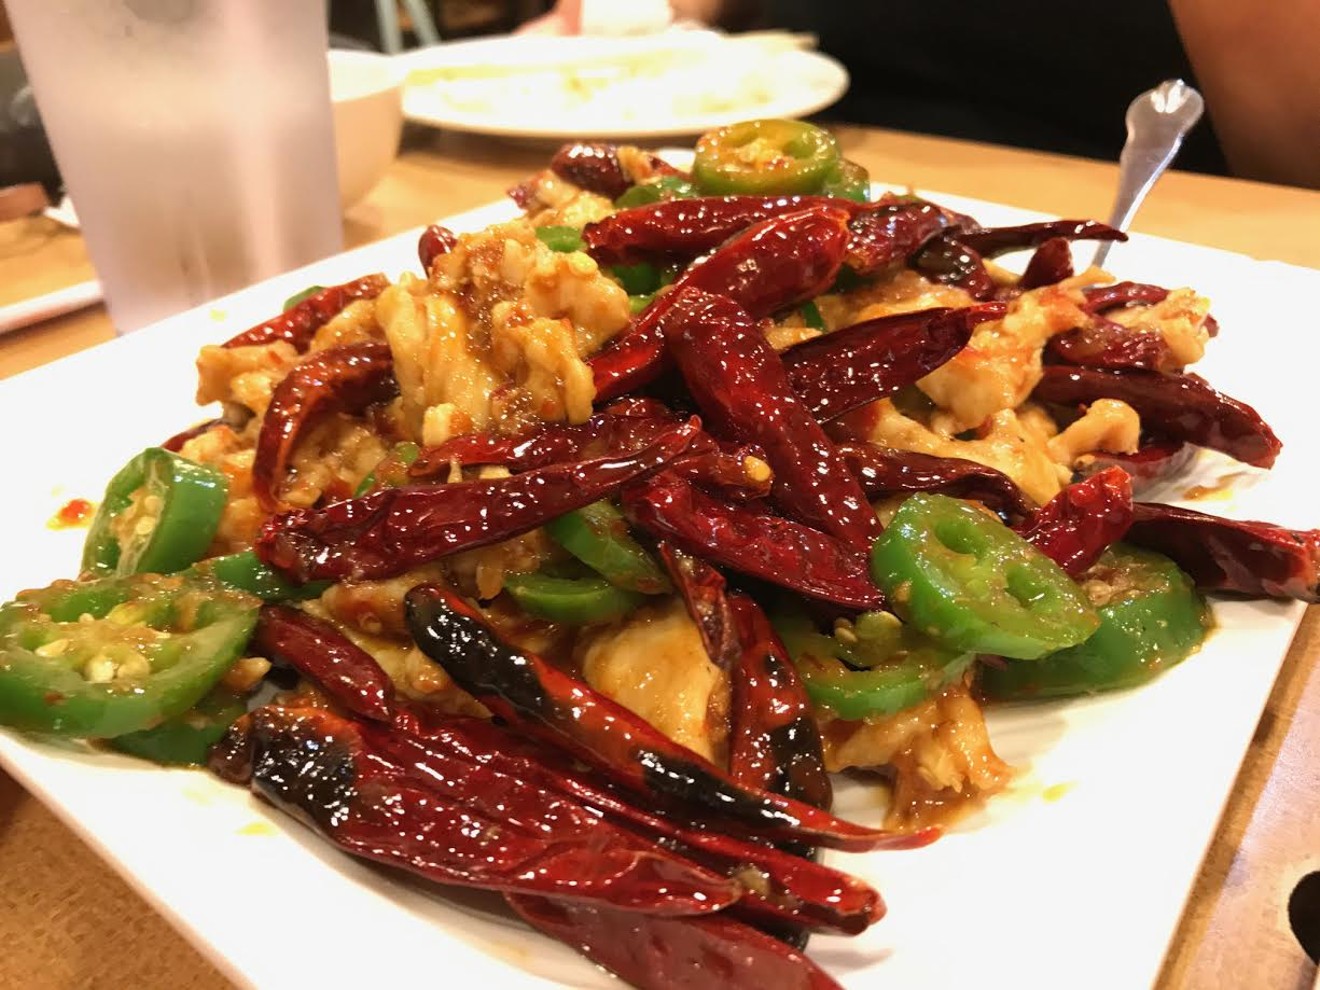 Spicy chicken is a reliable order at Fu Fu Cafe, just beware the red things.